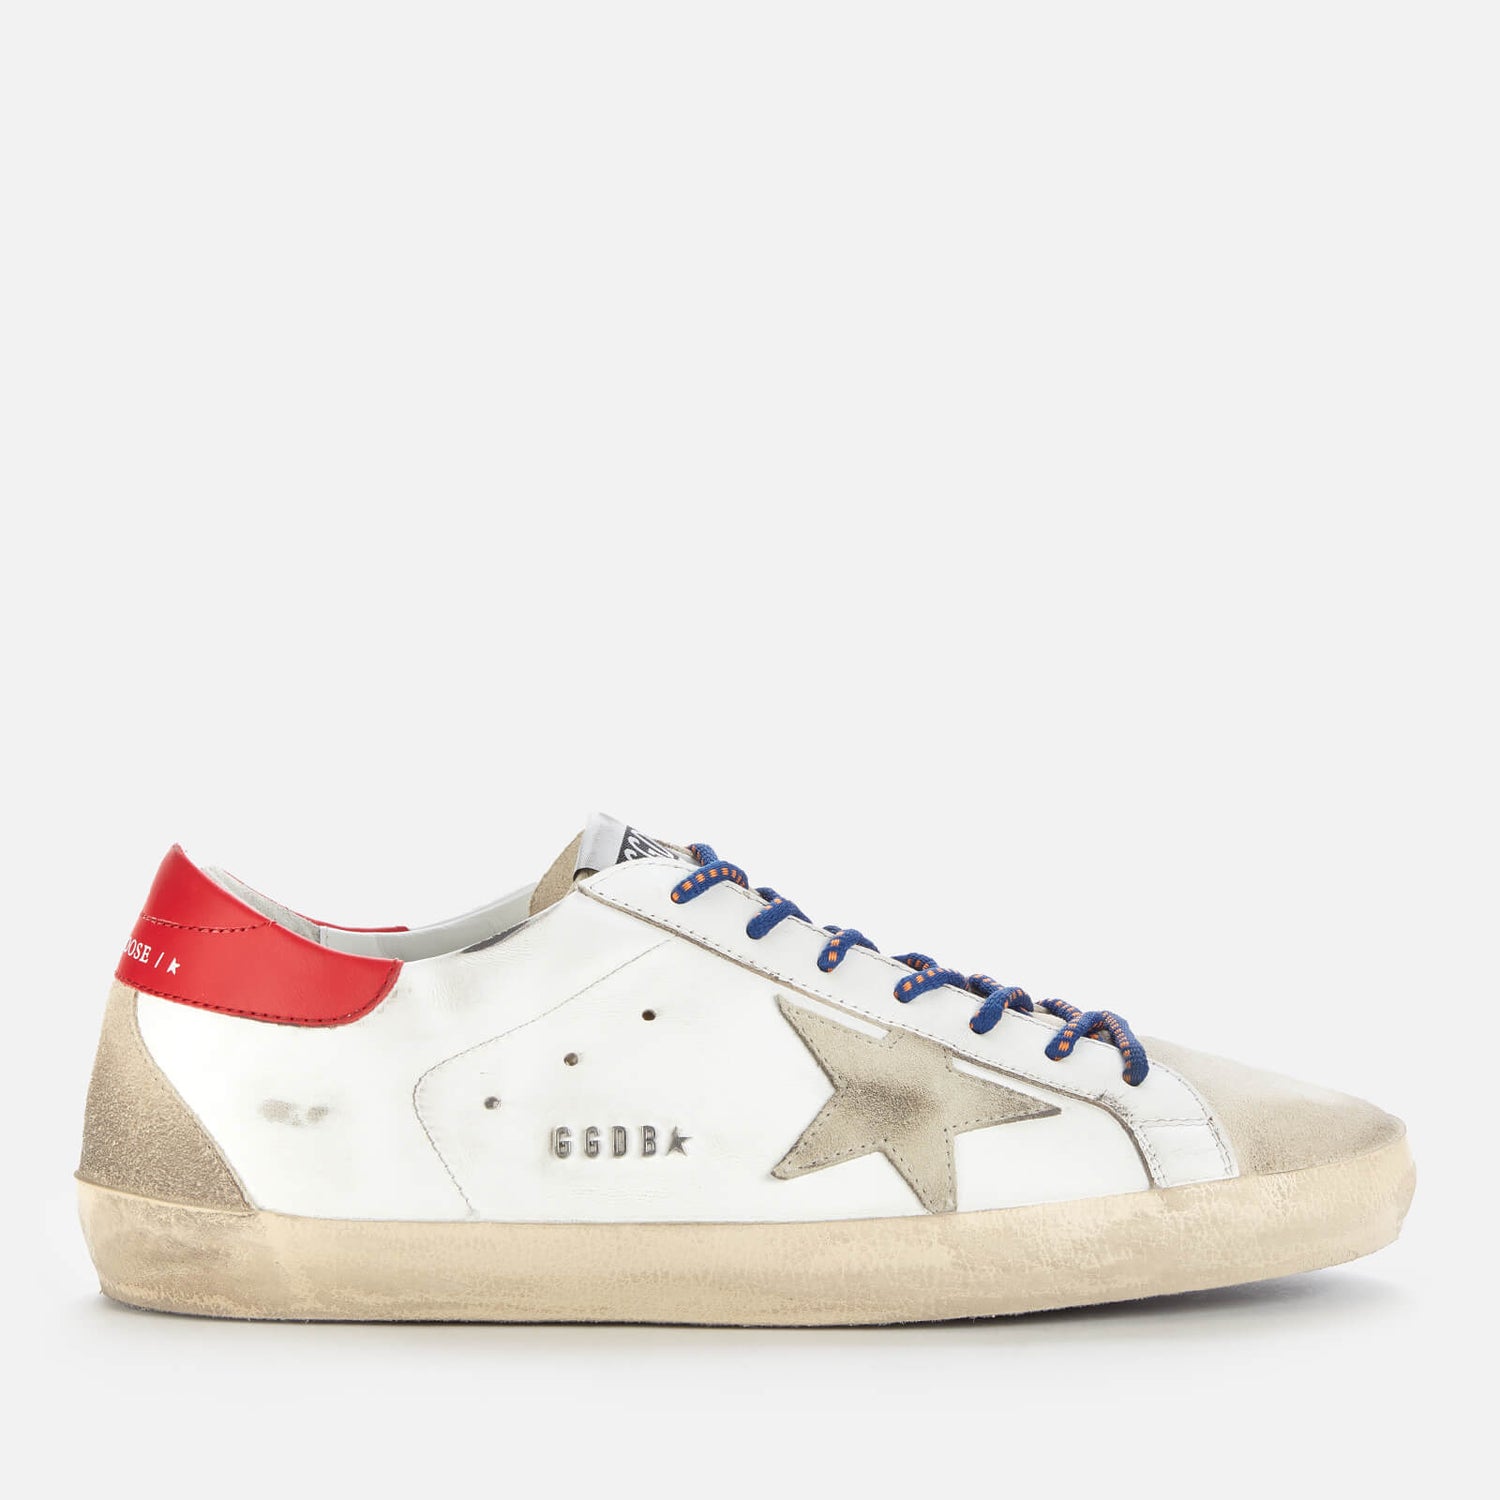 Golden Goose Men's Superstar Leather Trainers - Ice/White/Seedpearl/Red - UK 9